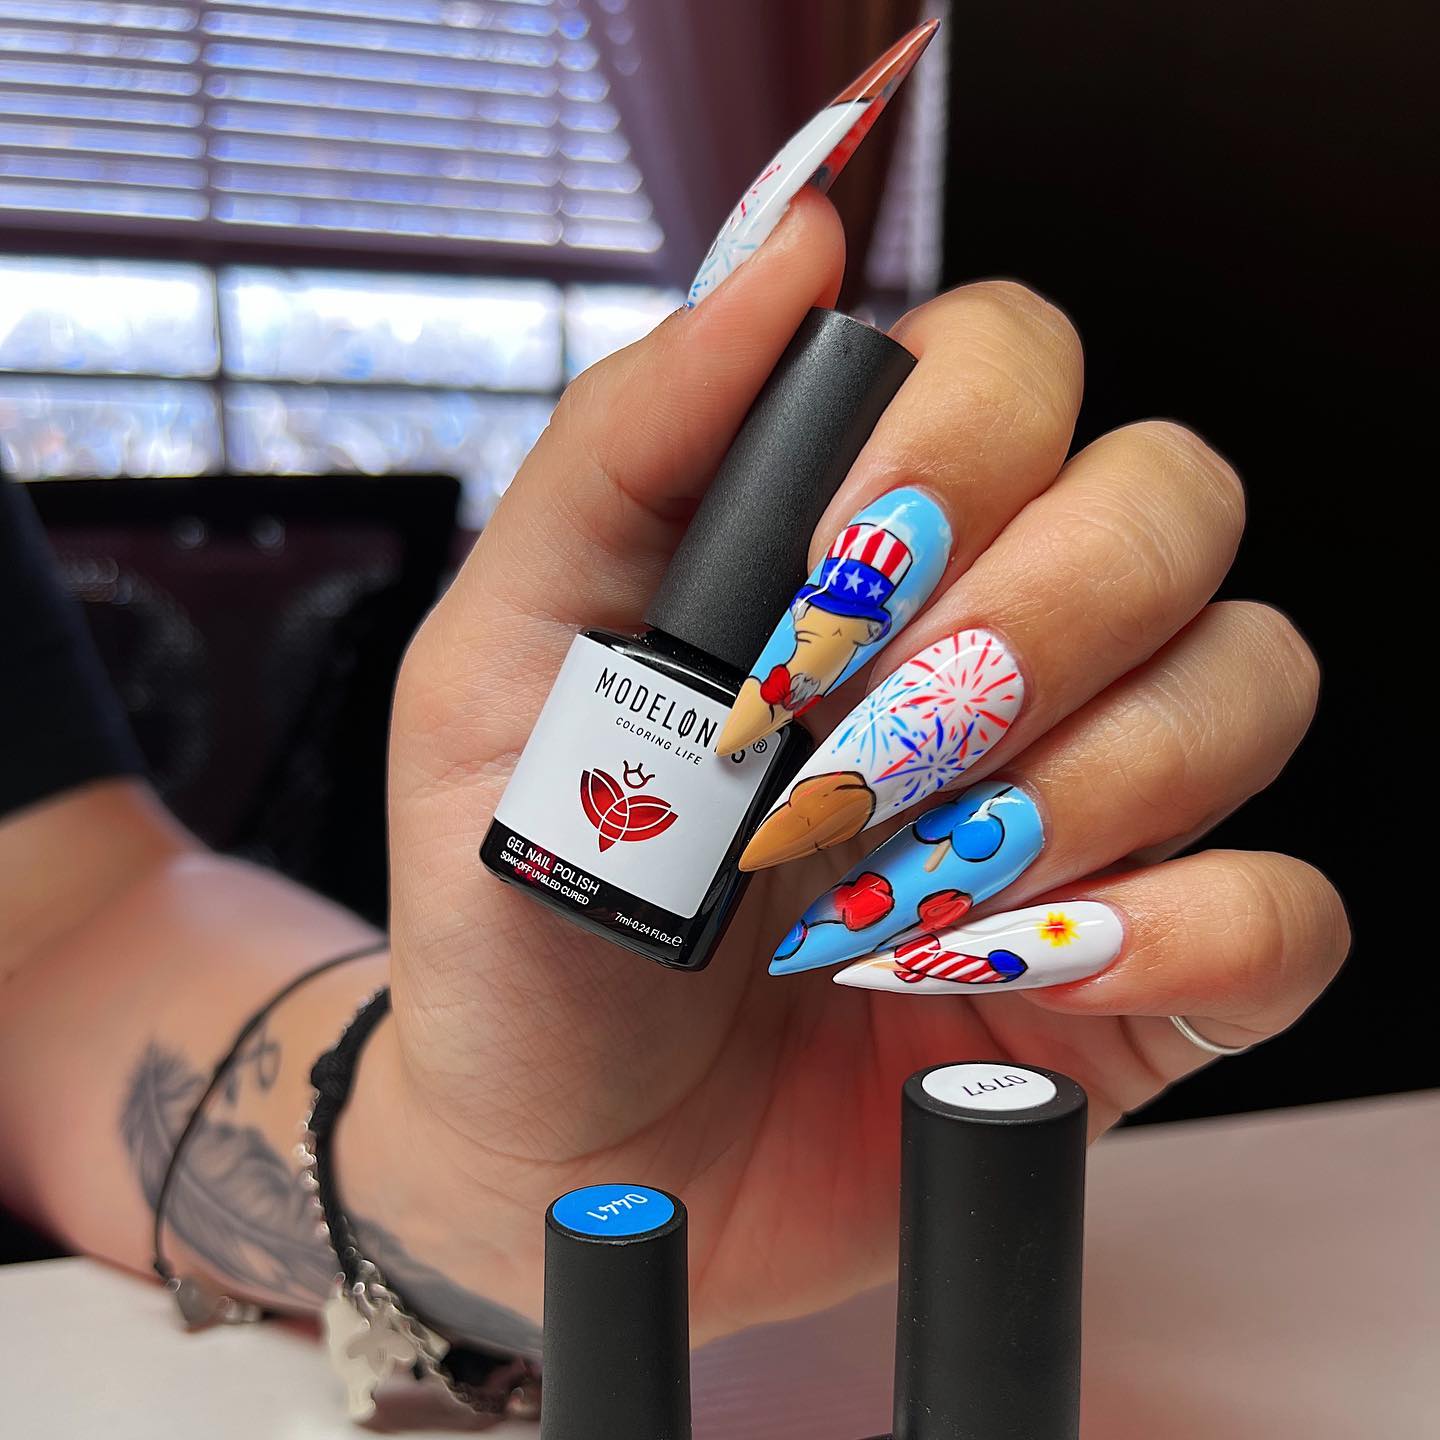 Is there a better way to celebrate the 4th of July by wearing nails like the one above?  Just have fun with your themed nails.